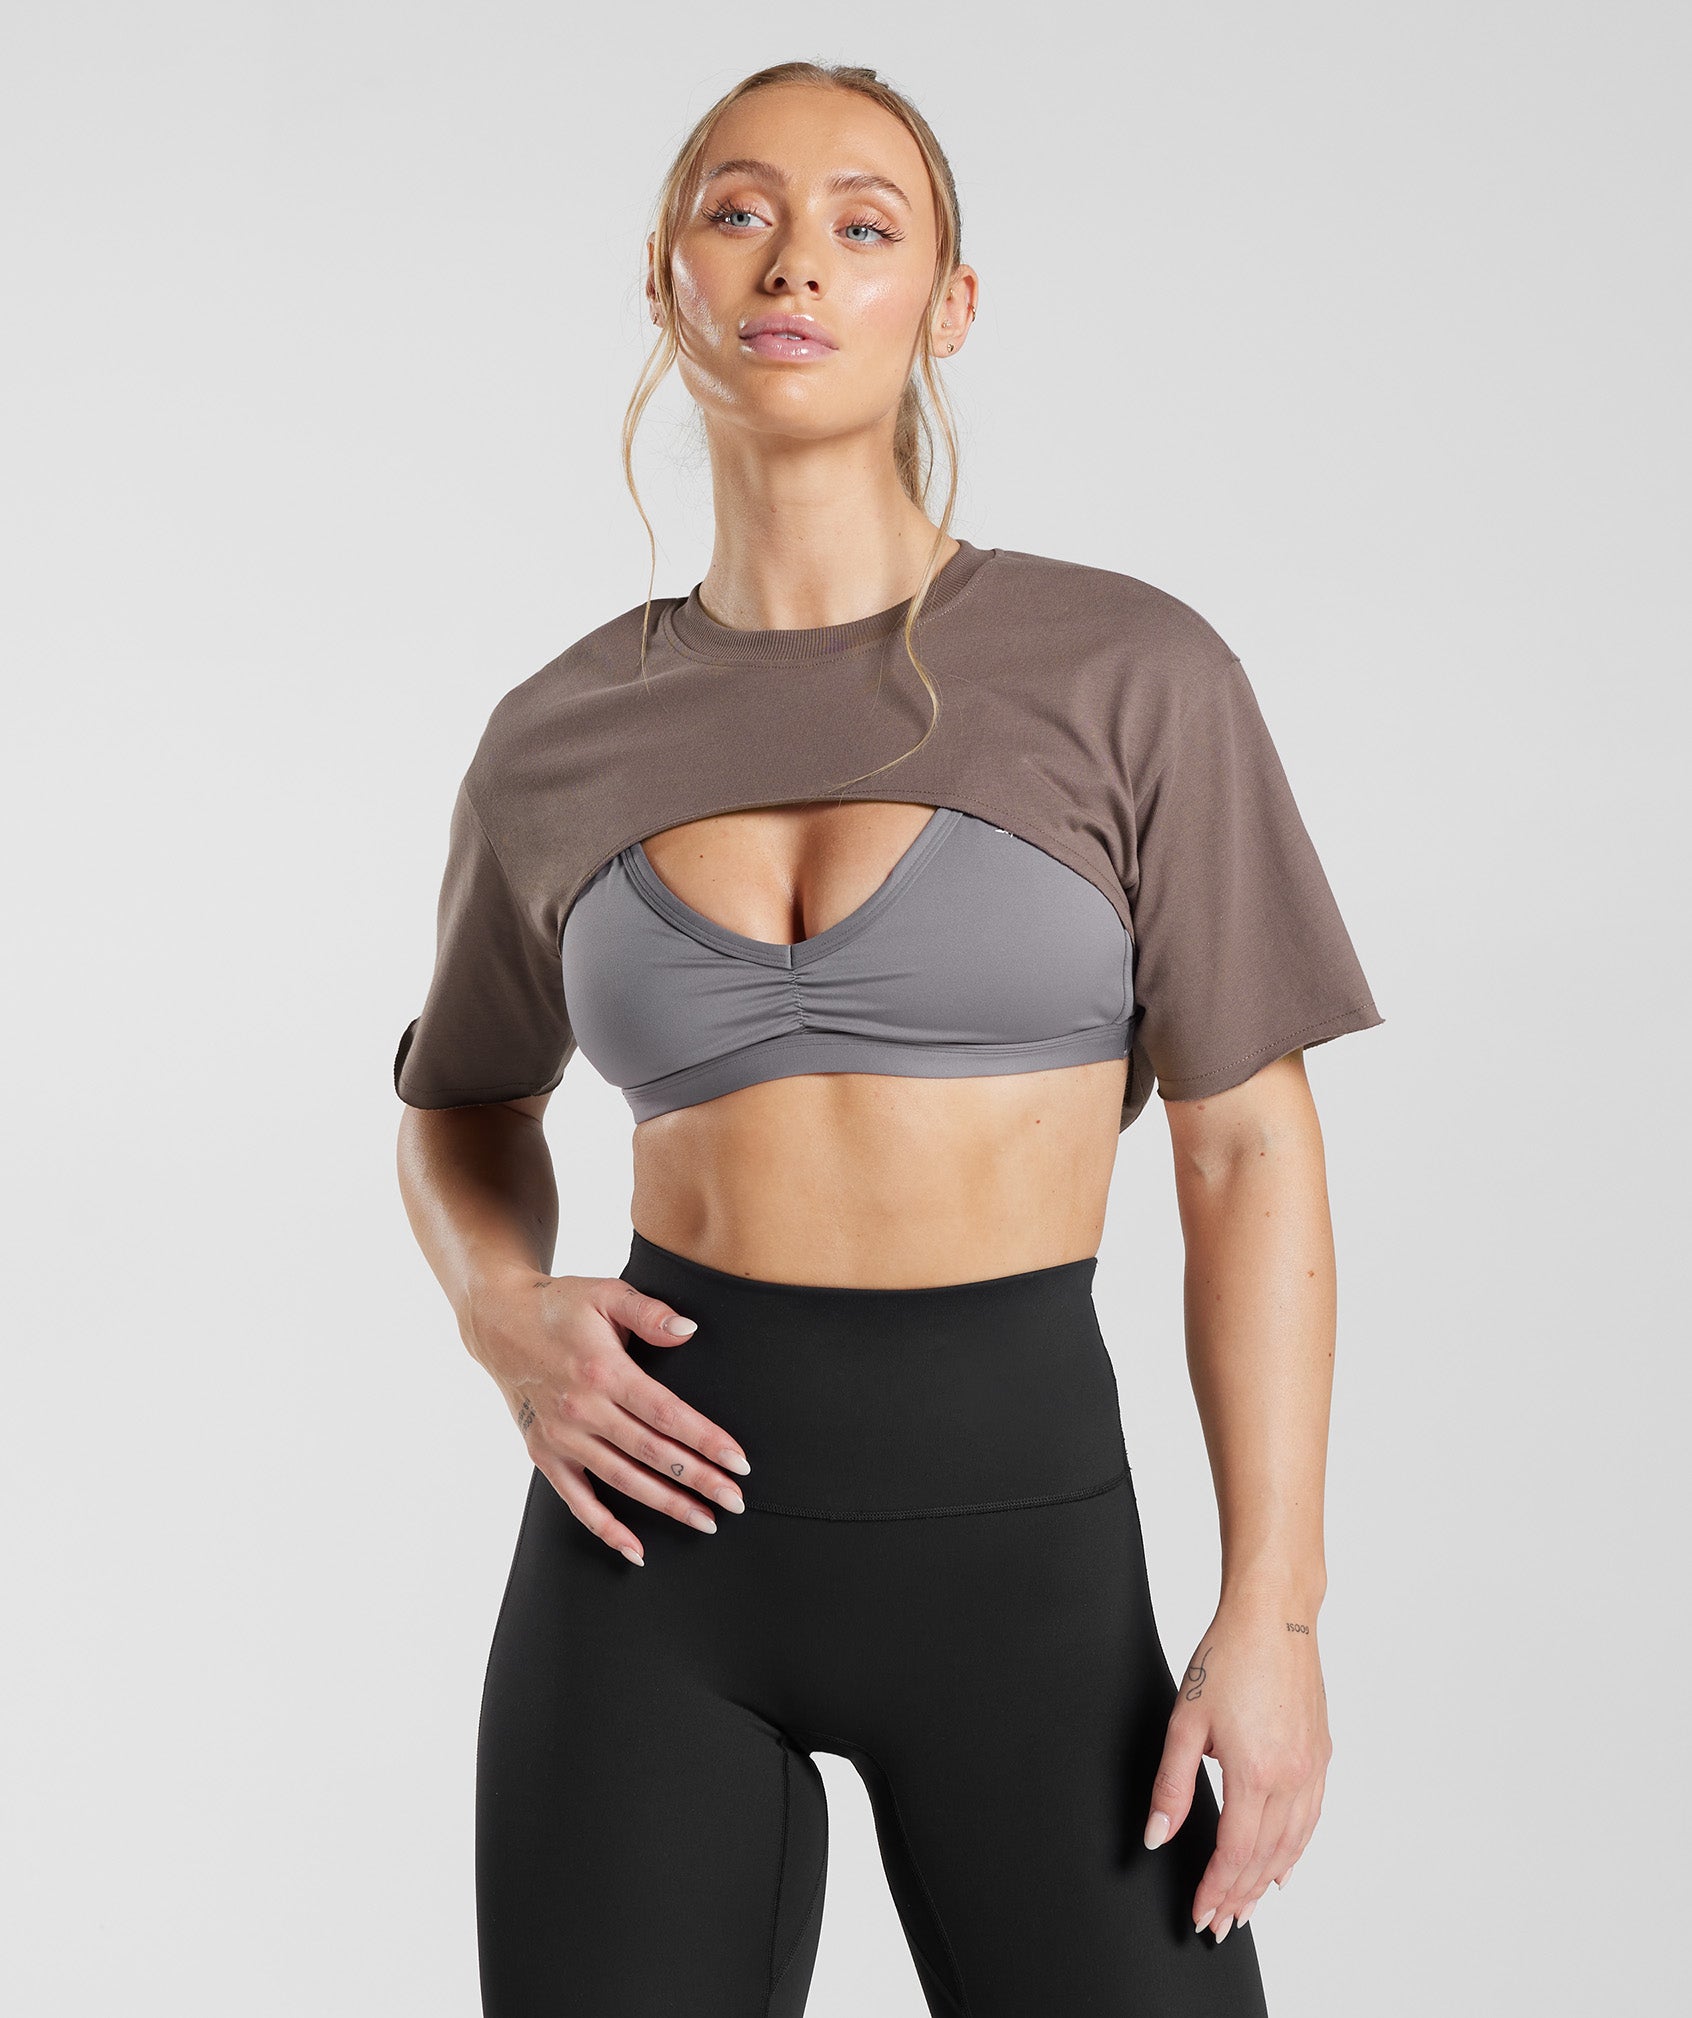 Legacy Shrug Top in Truffle Brown - view 1